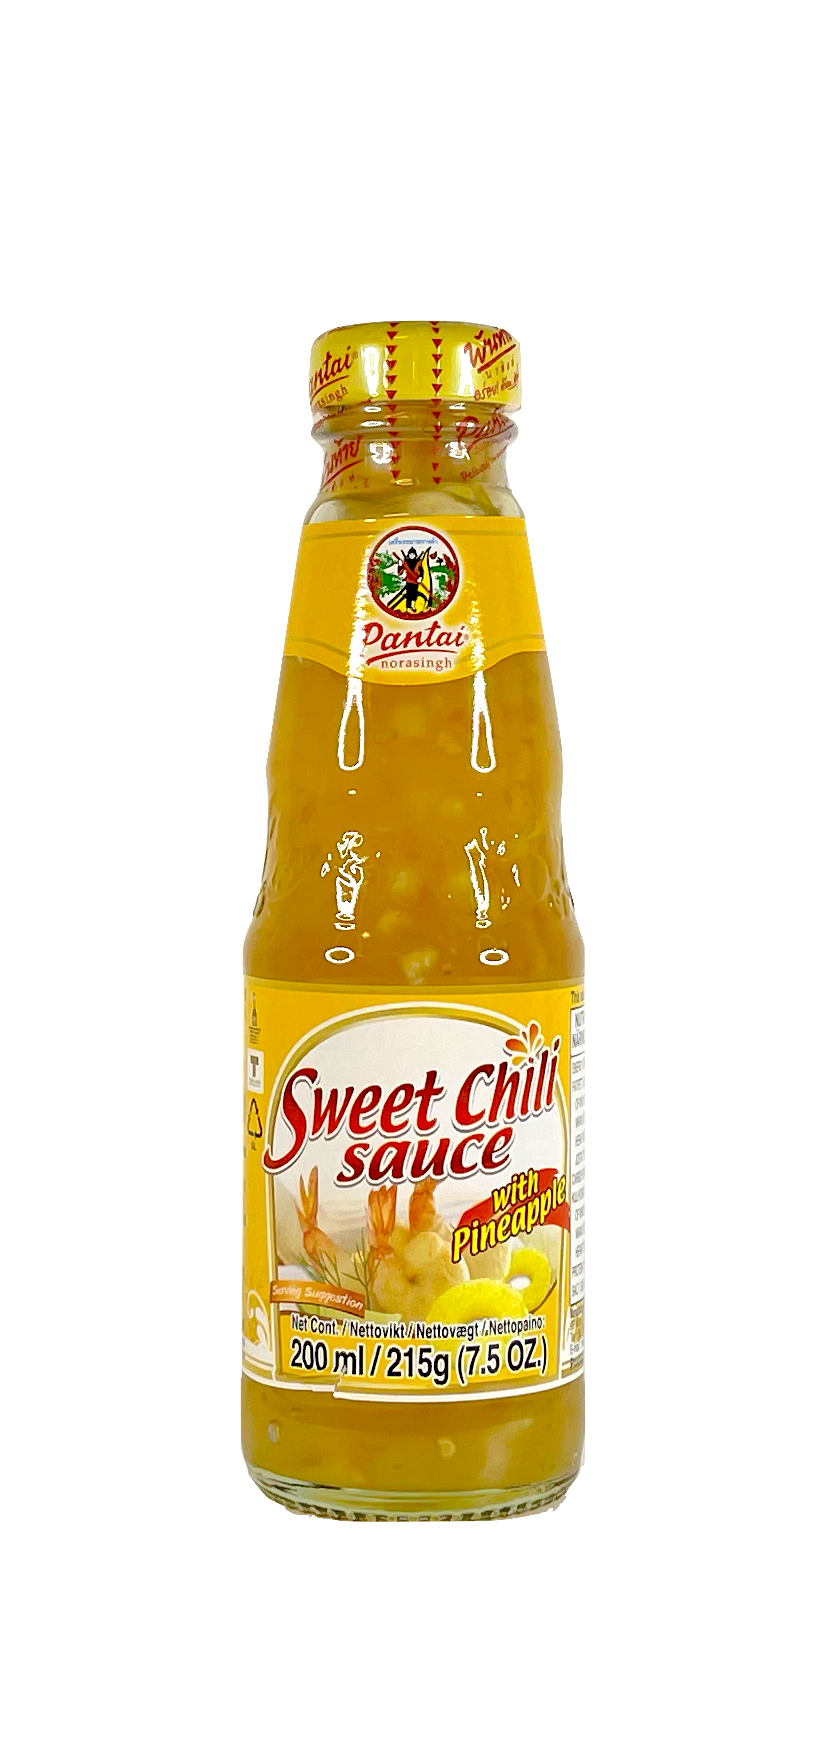 Sweet Chili Sauce With Pineapple Flavour 200ml Thailand